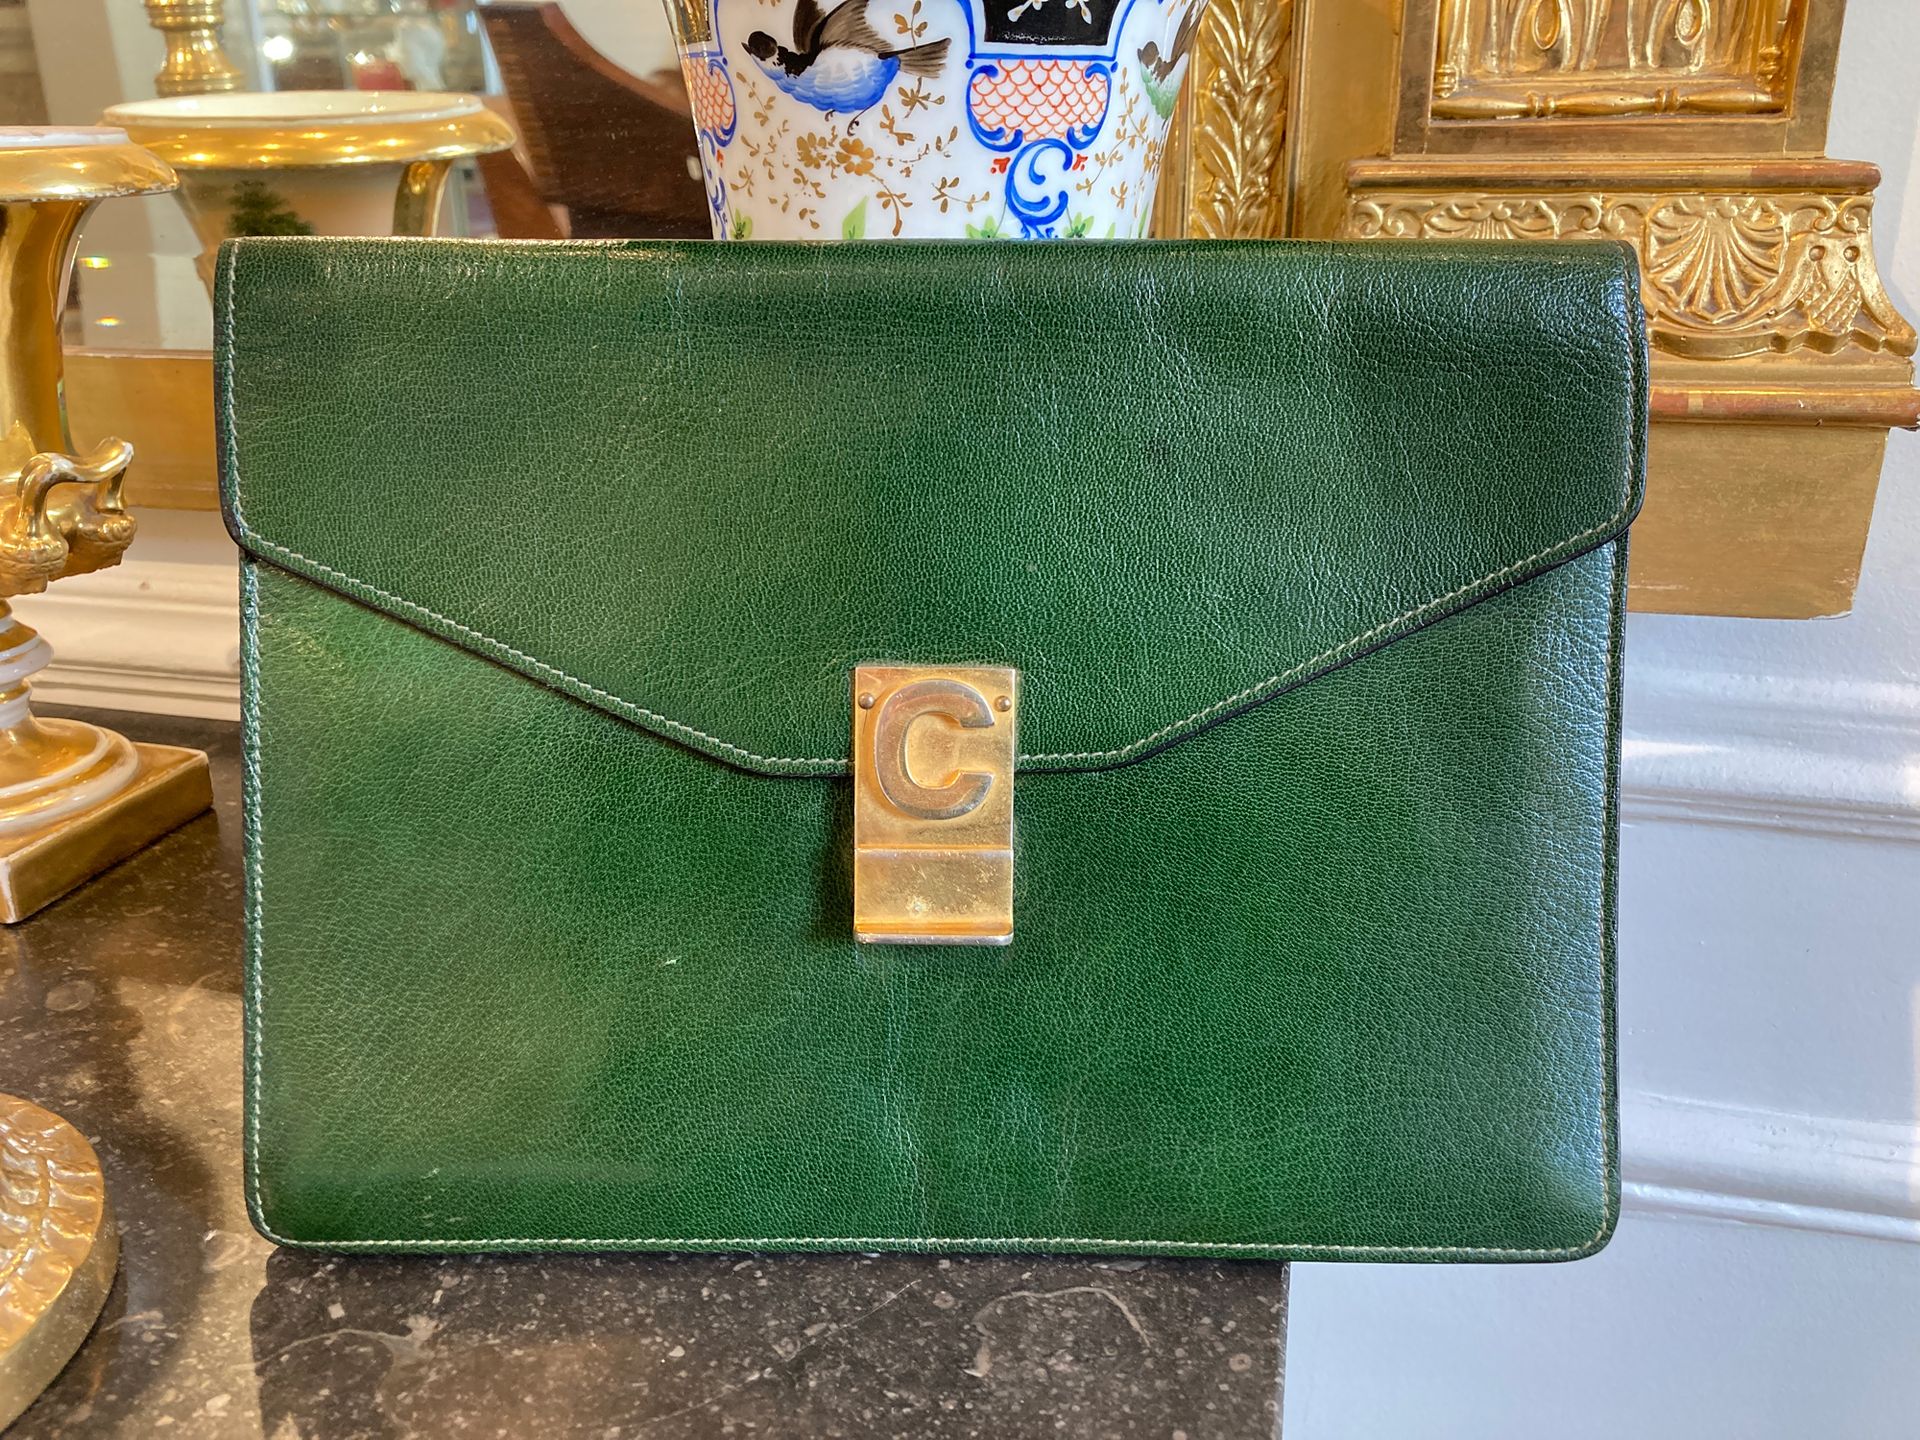 Null CELINE Green leather clutch. Flap closure with gold buckle. 19 x 26 cm wear